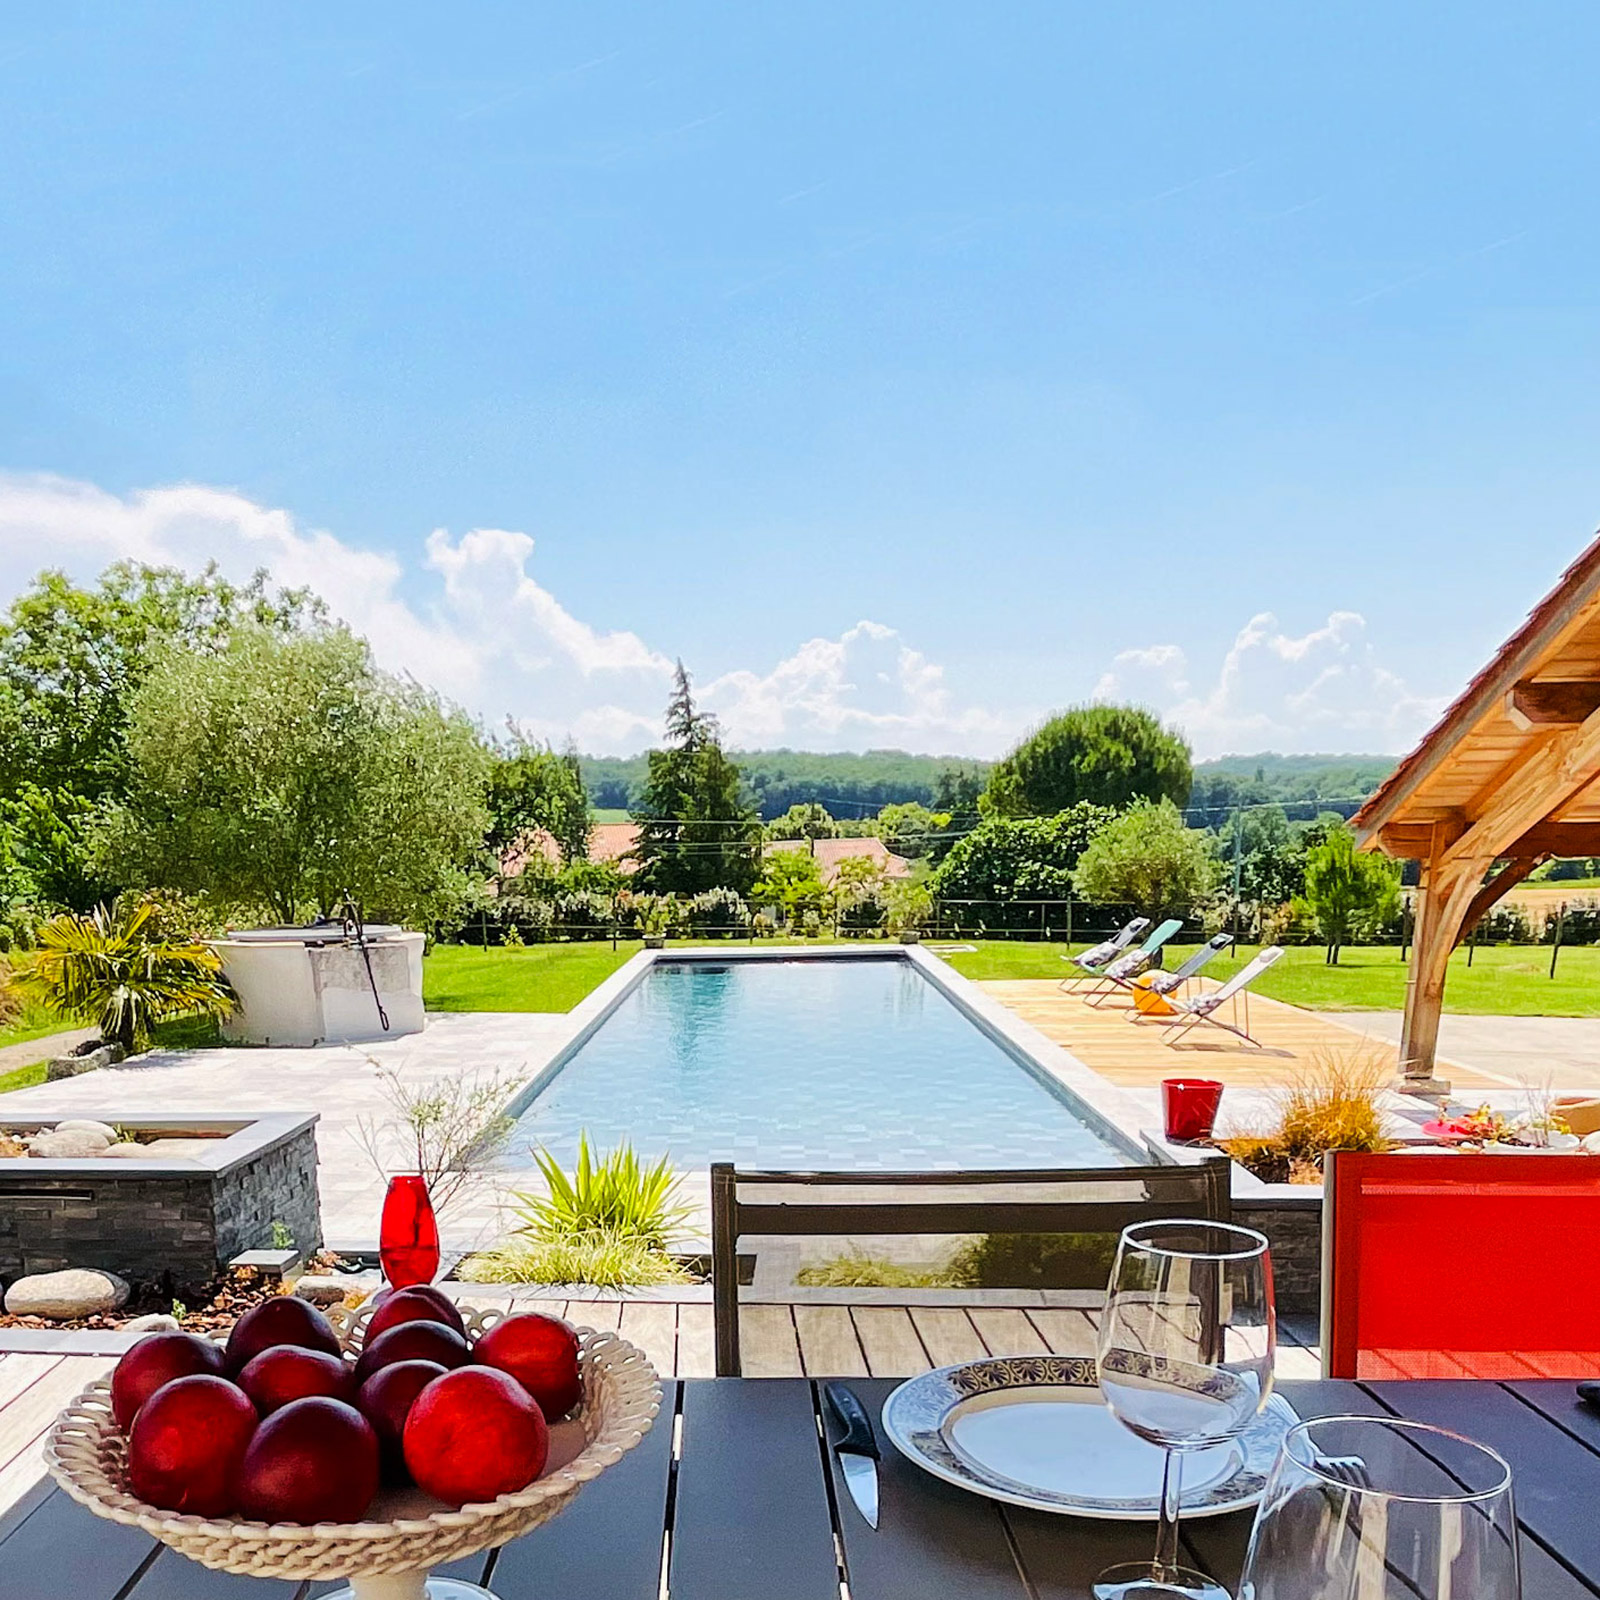 Ferme des Rivailles villa in sw France with a 16m heated salt water pool